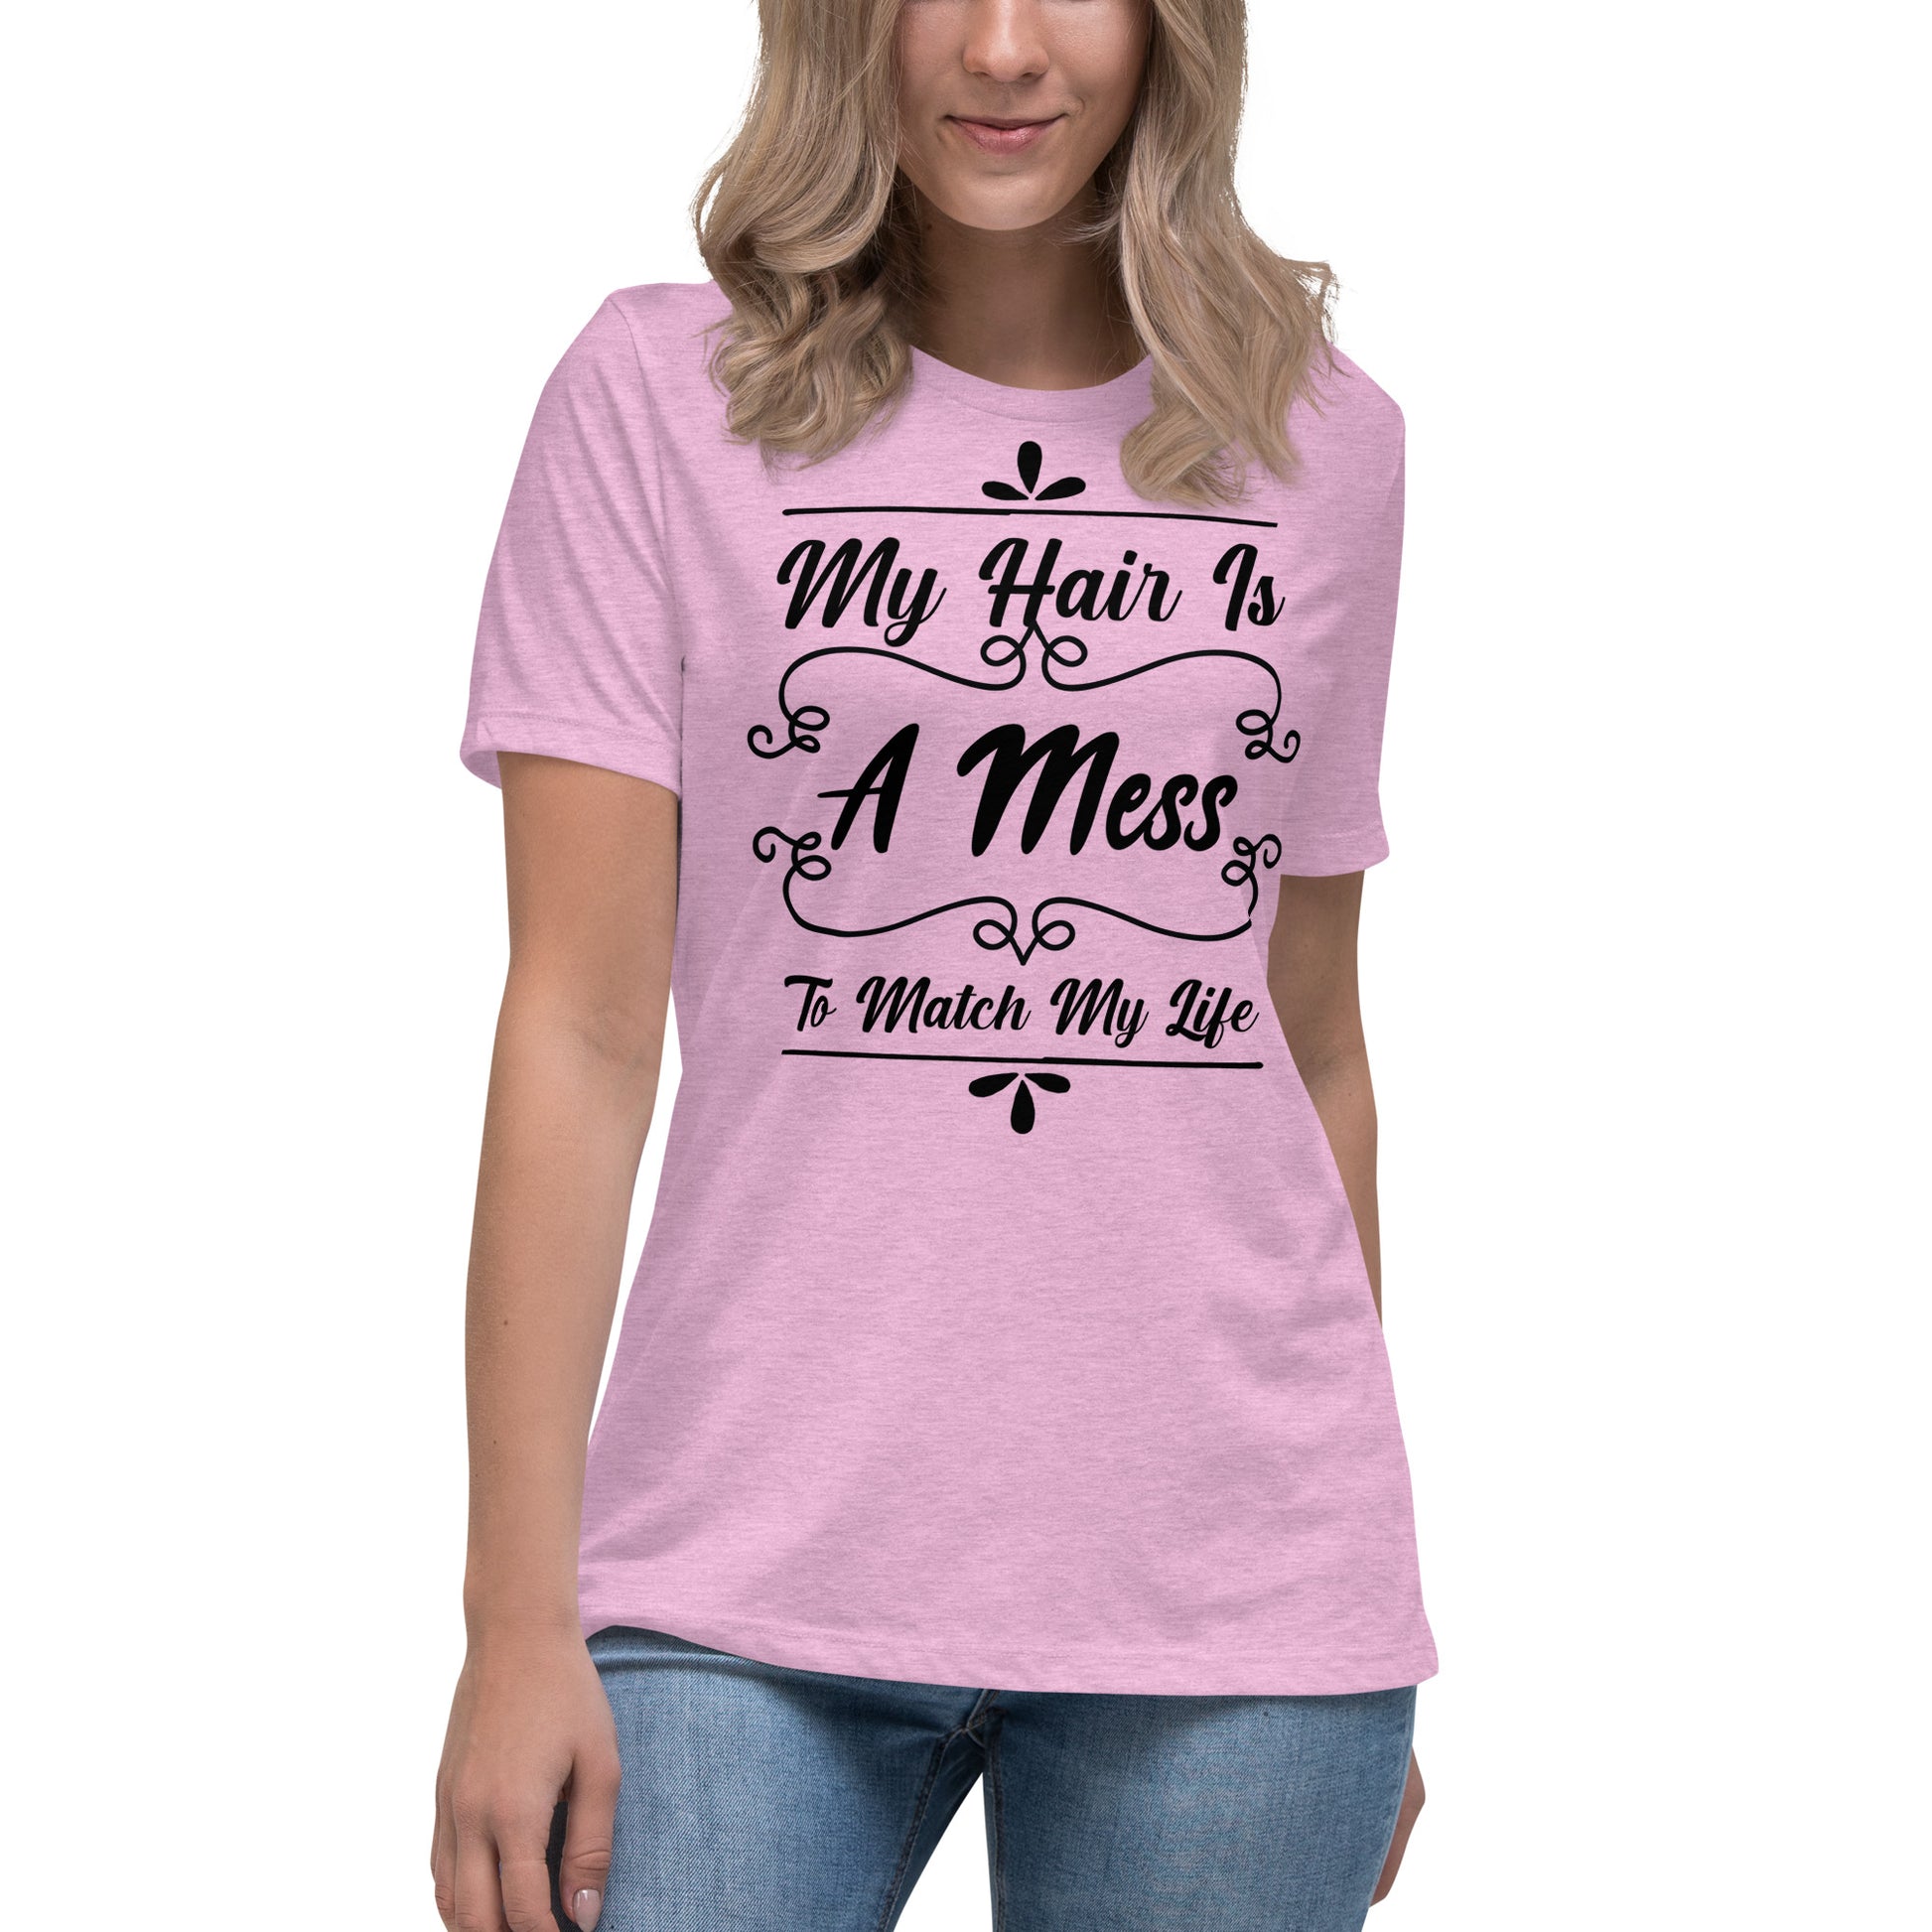 My Hair is a Mess to Match My Life Women's Relaxed T-Shirt